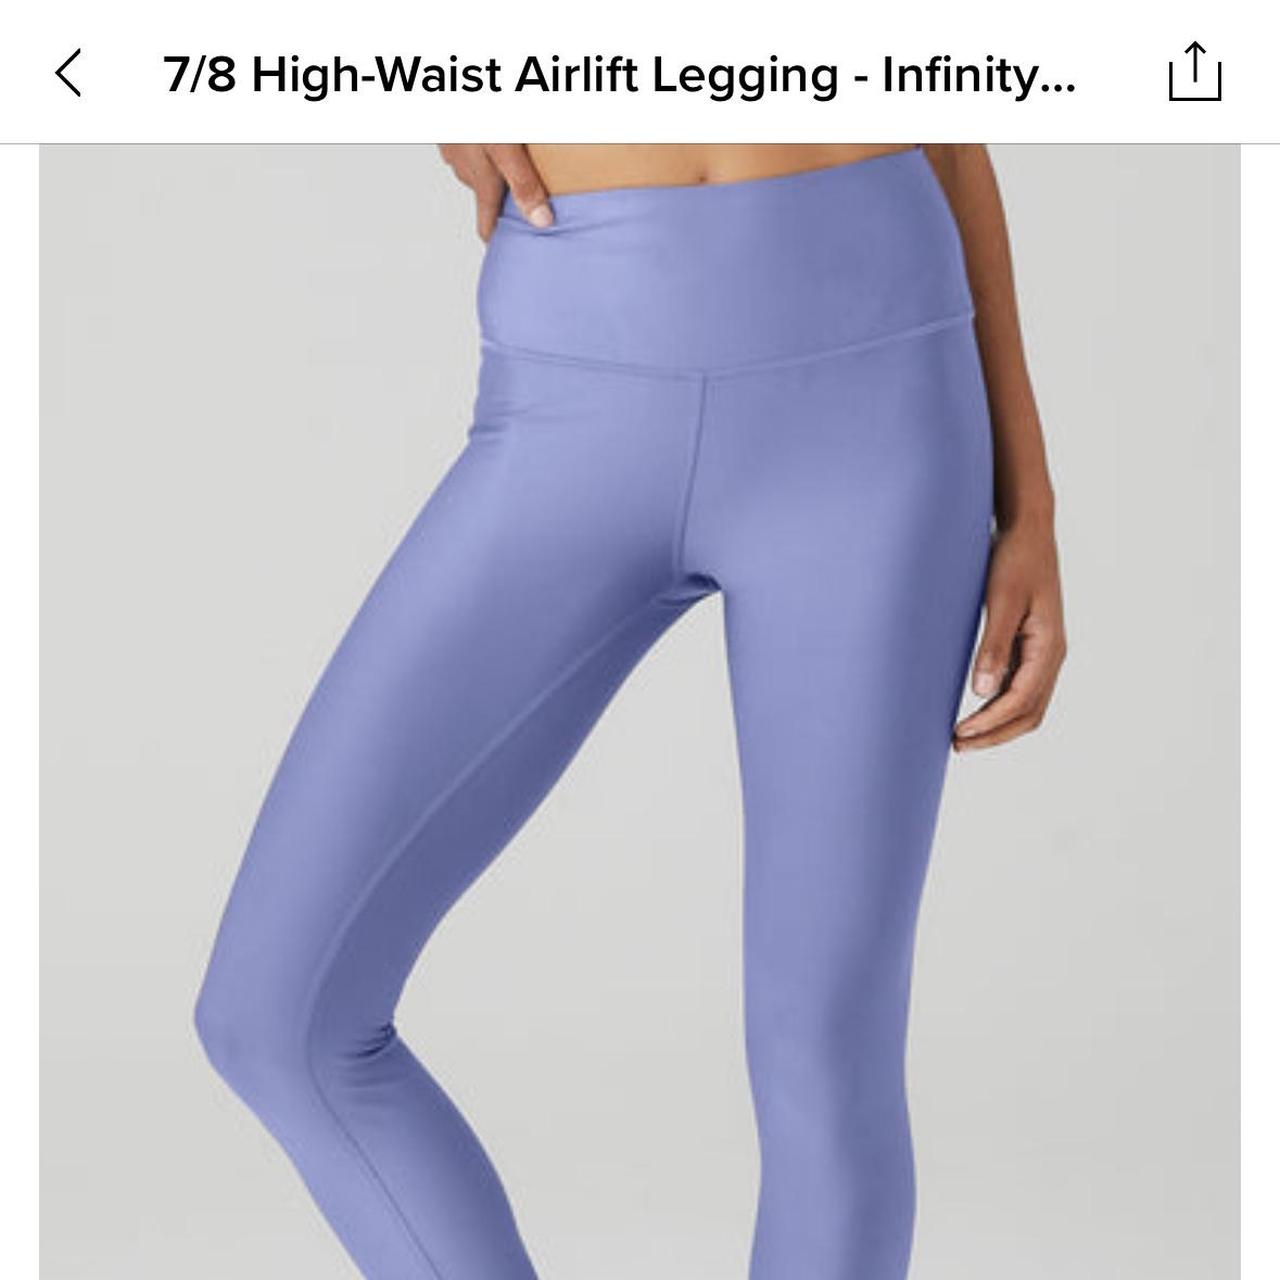 ALO Yoga 7/8 High-Waist Airlift Legging in Infinity Blue Size